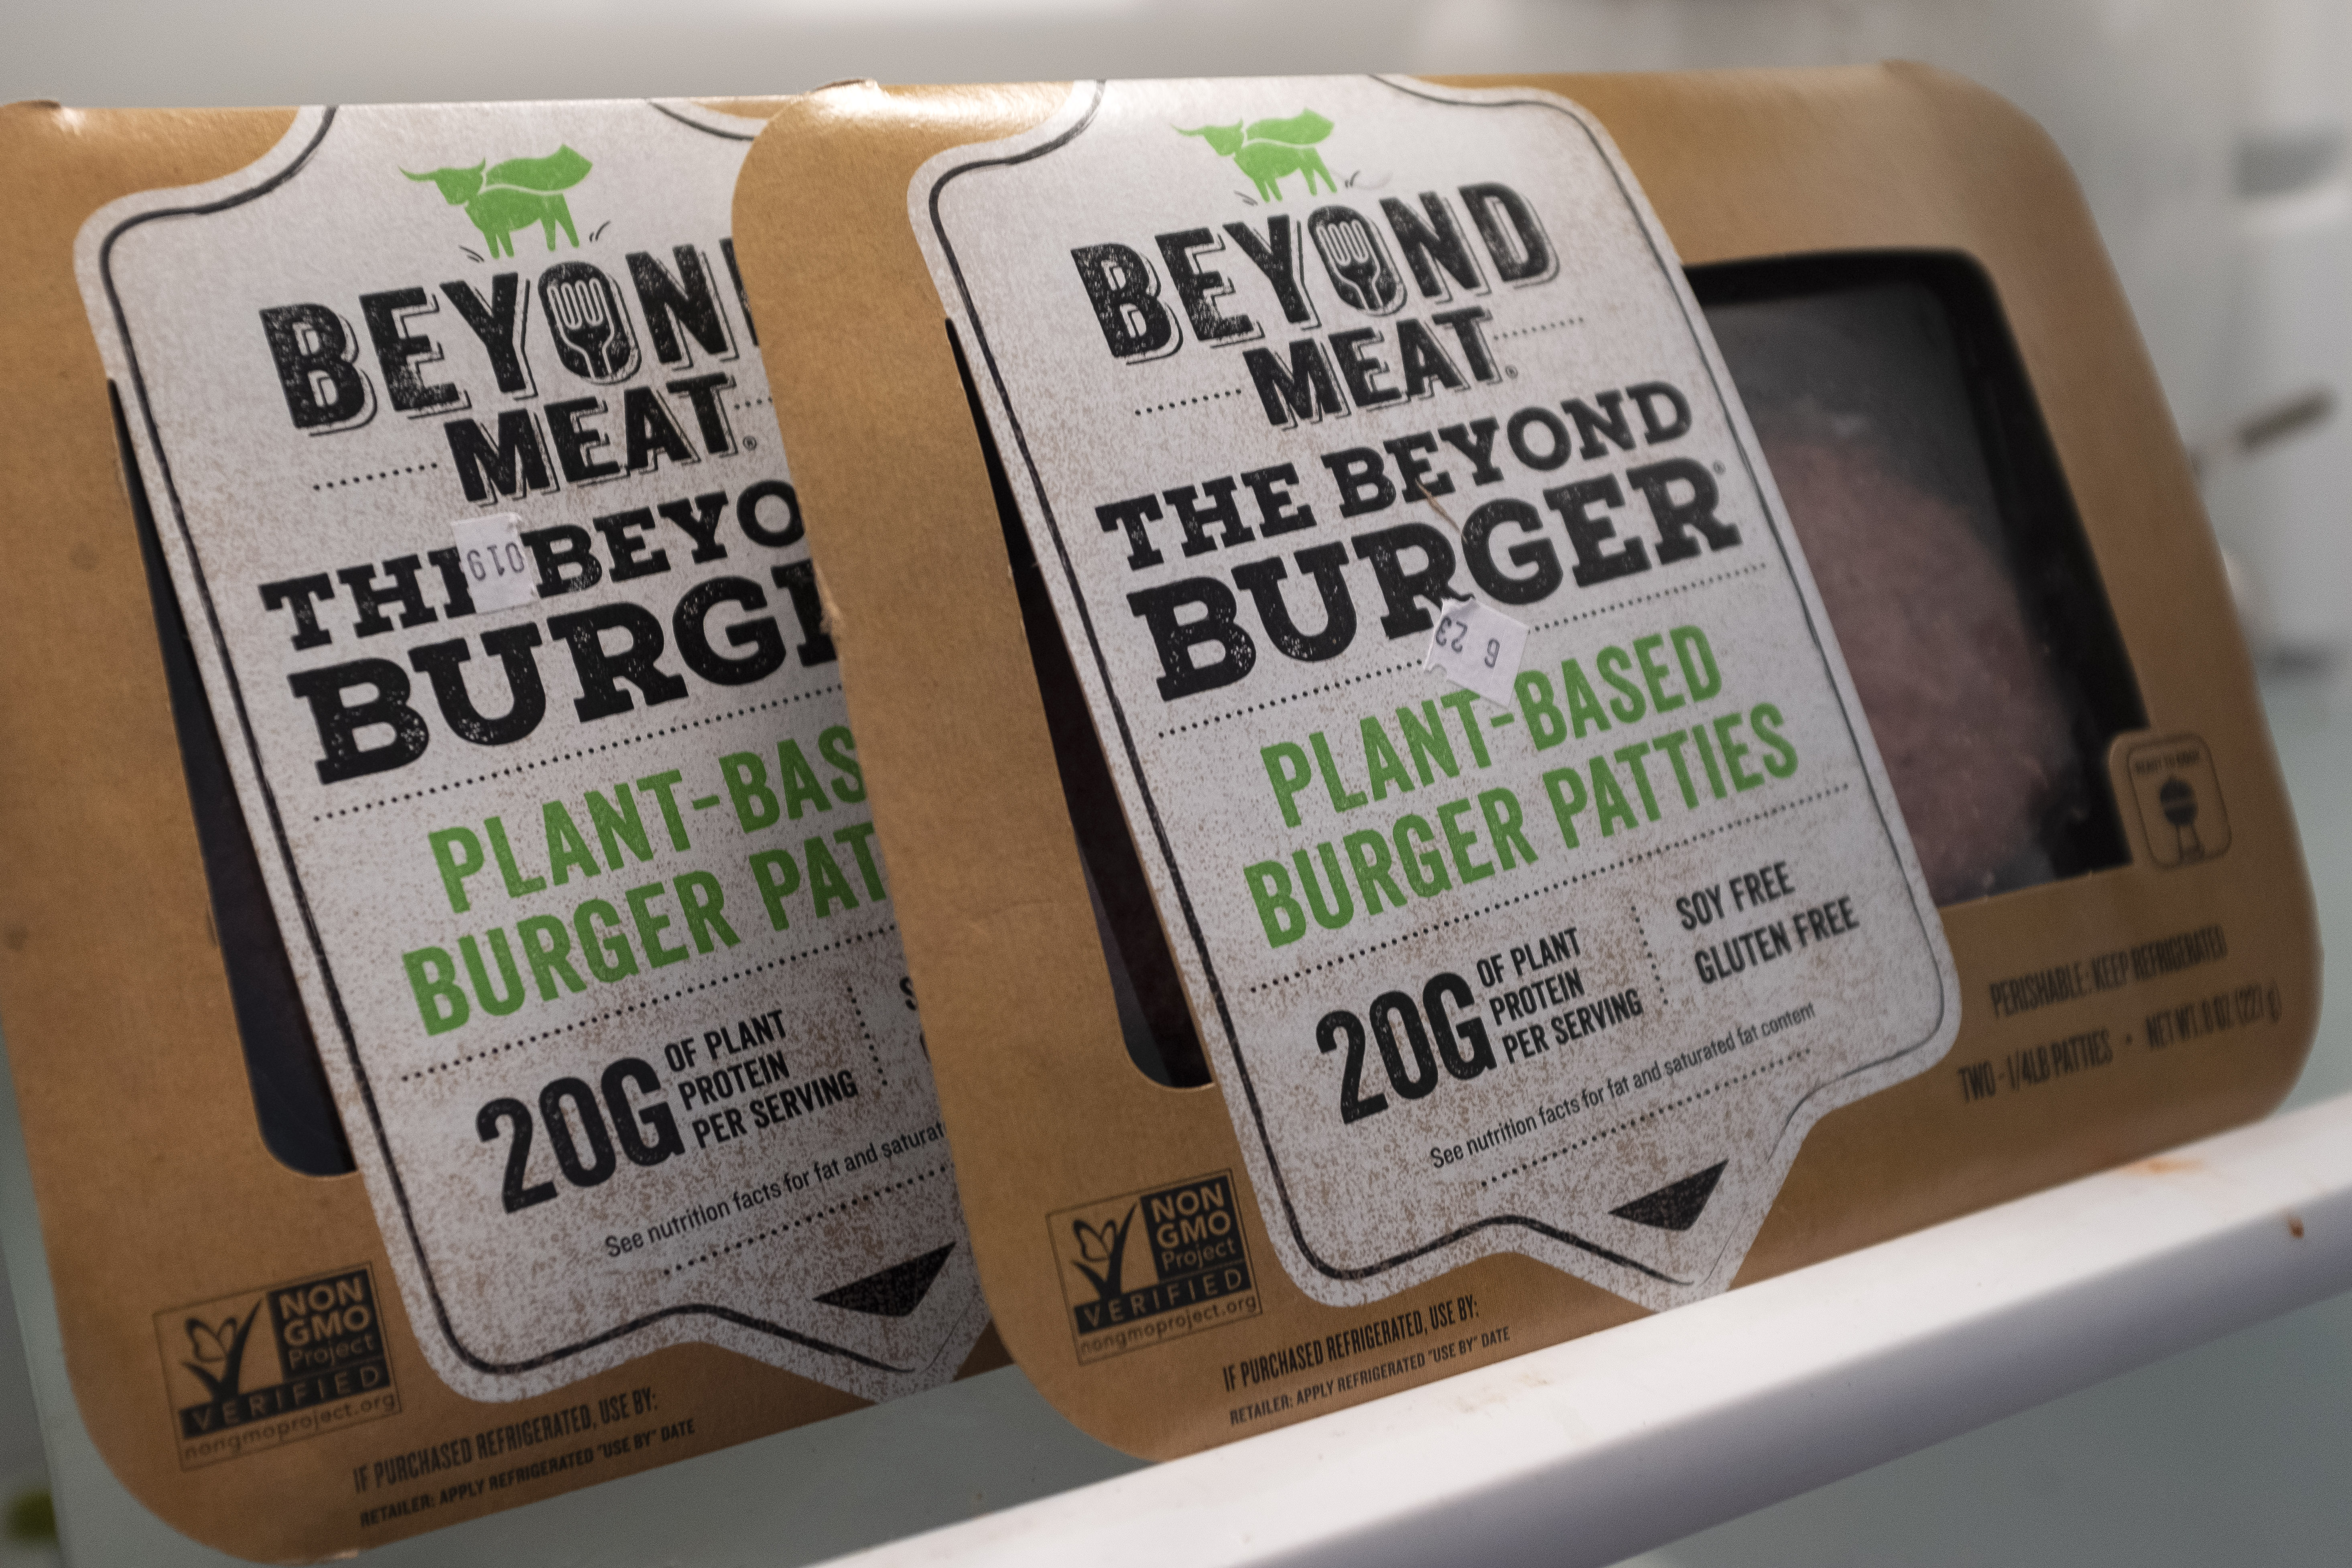 beyond meat stock quote